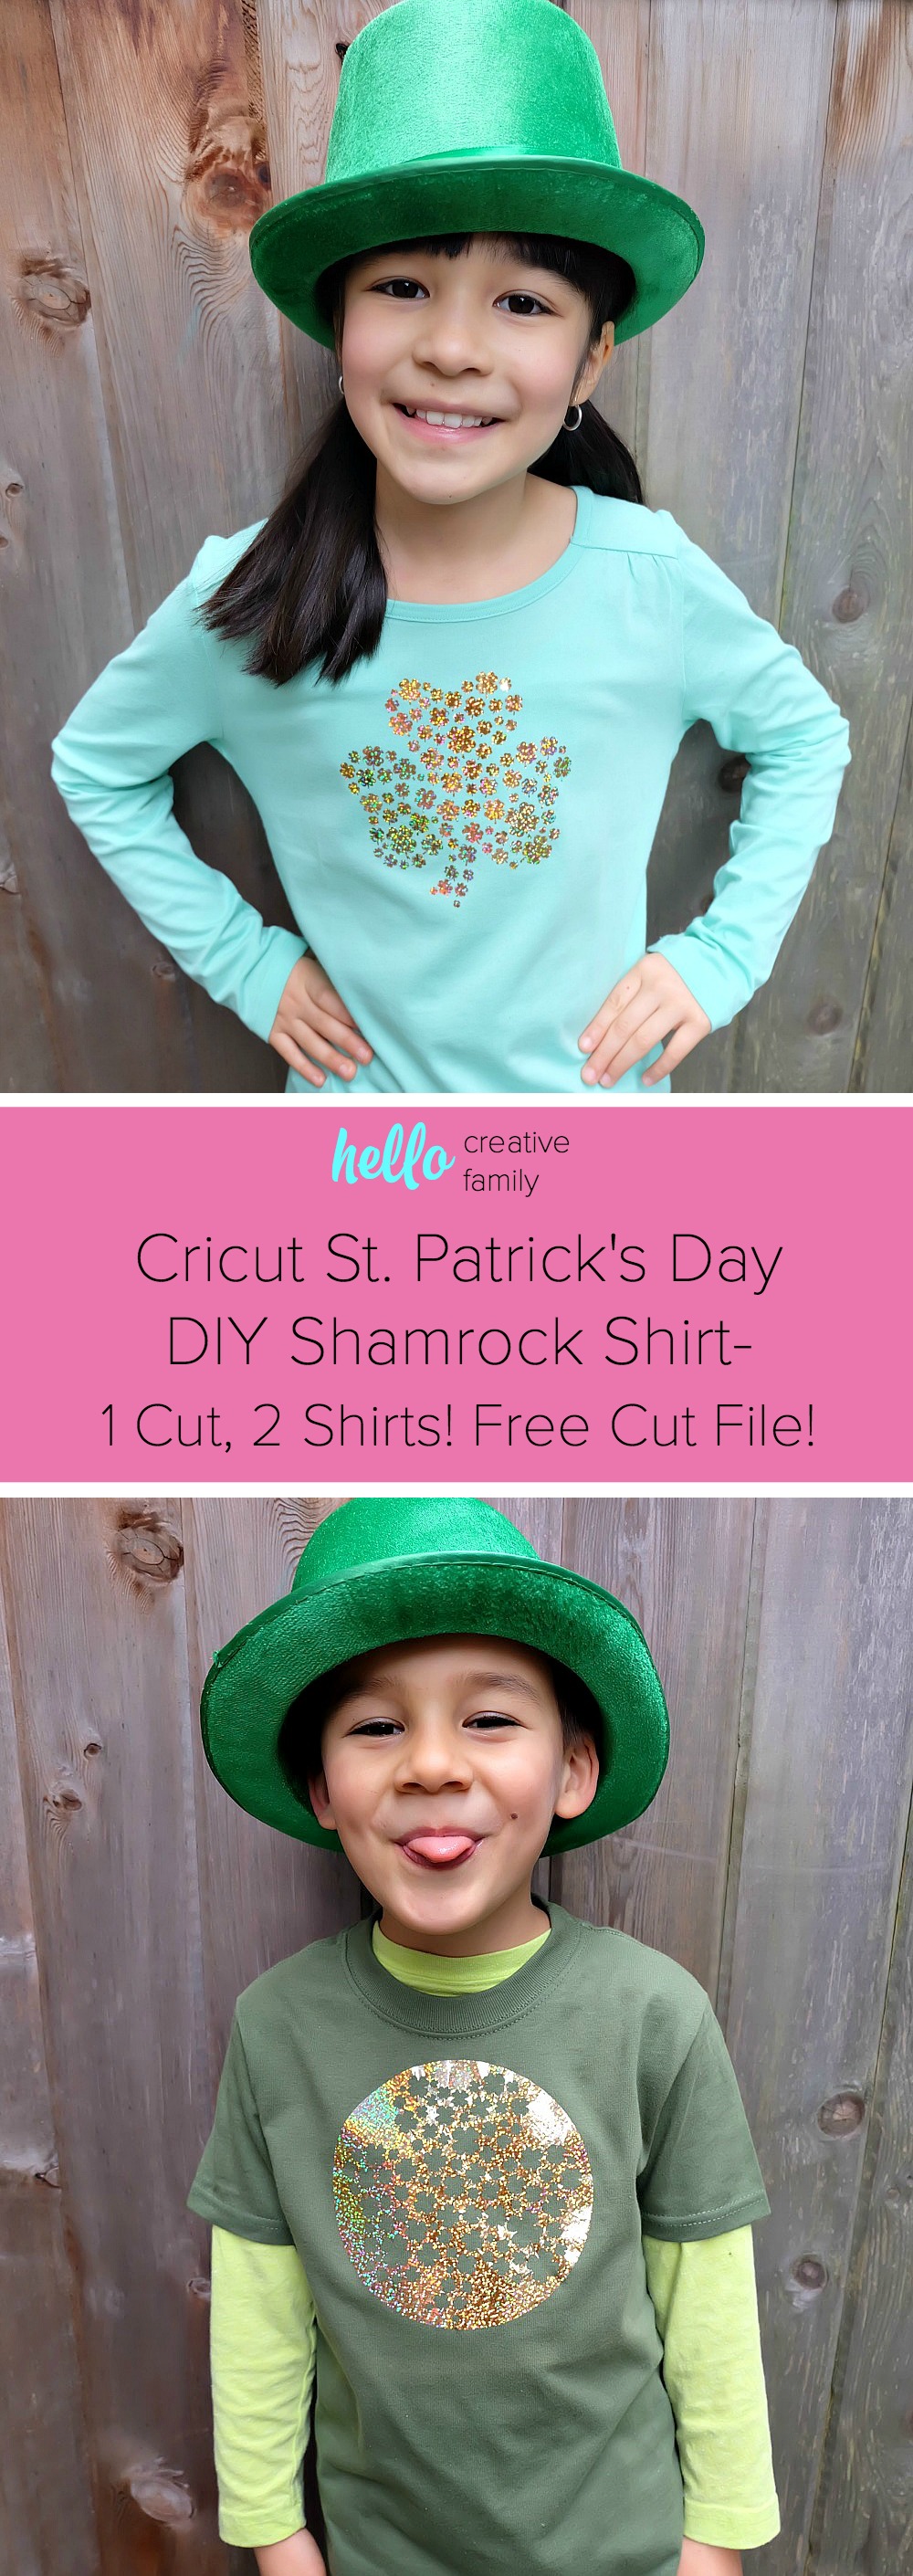 Celebrate St. Patrick's Day in style with this adorable DIY shamrock shirt! Make this project using your Cricut Maker or Cricut Explore. With this unique design one cut can make two shirts! Includes free cut file! A fun shirt for kids or adults! #cricutmade #cricutmaker #cricutholiday #KidsClothes